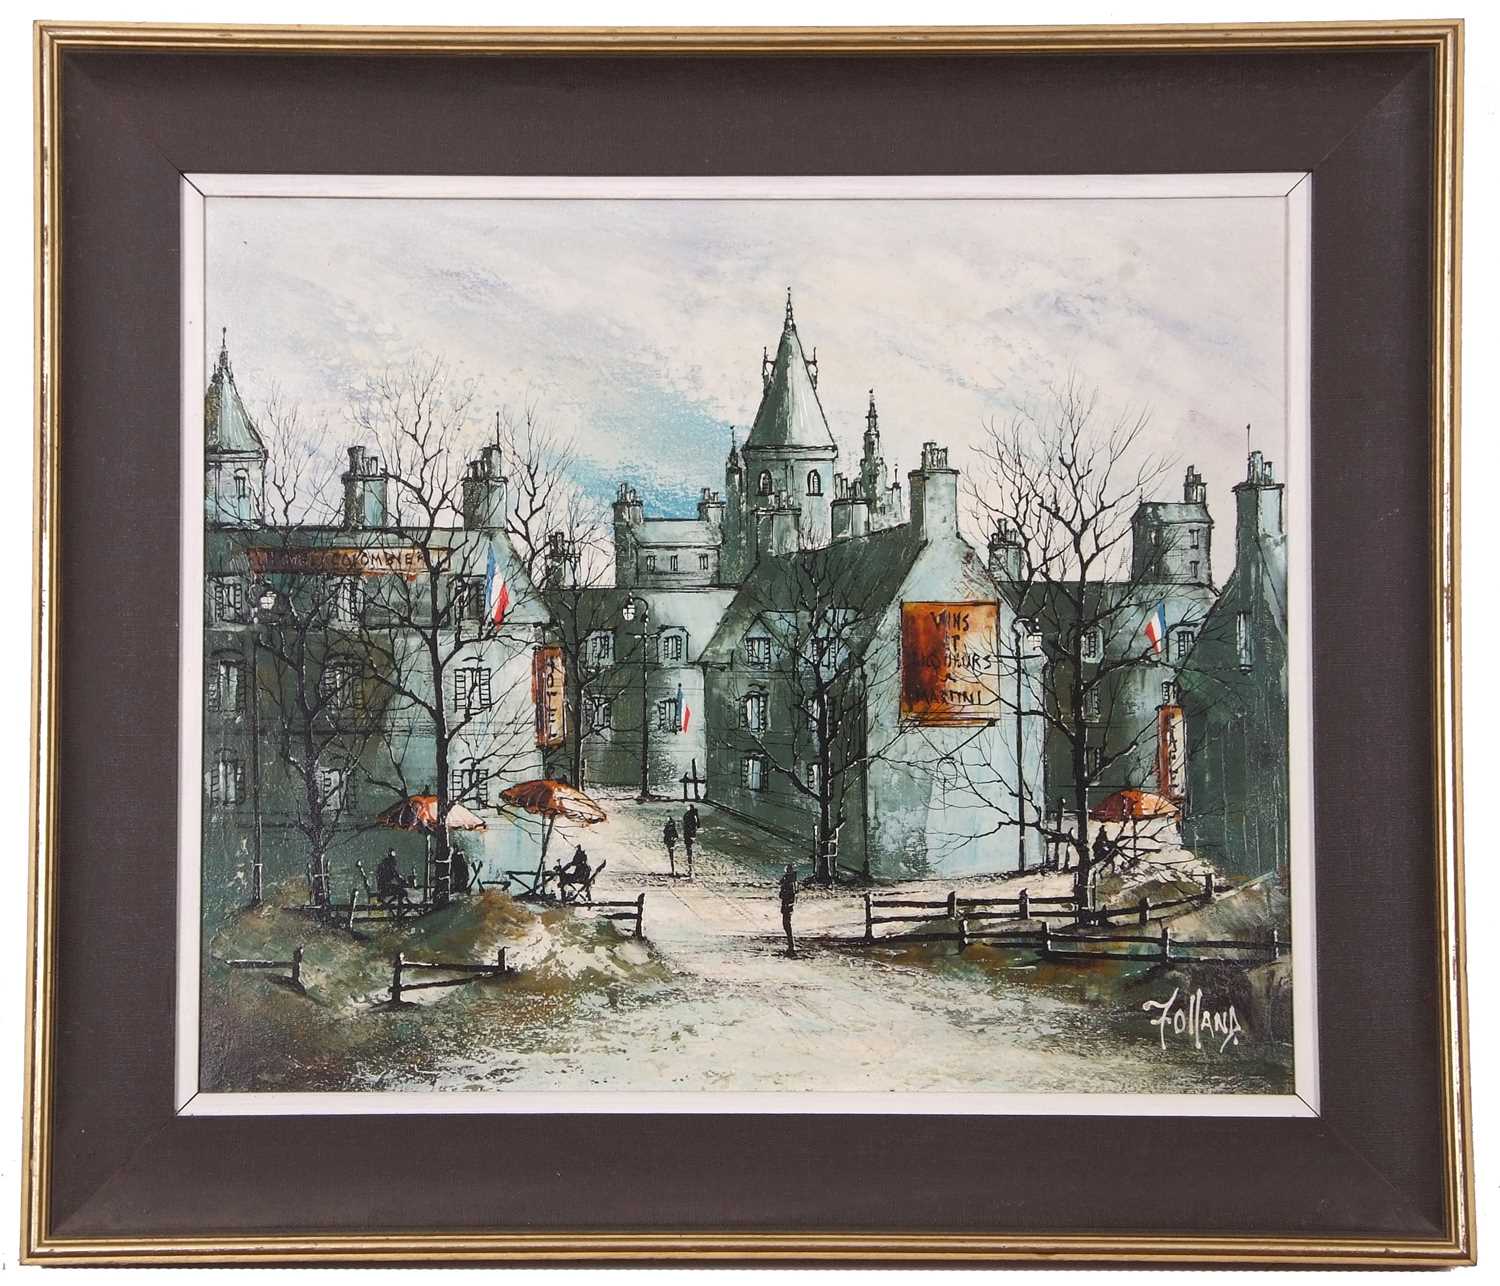 Ronald Folland (1932-1999), French town scene, oil on canvas, signed, 48x58cm, framed